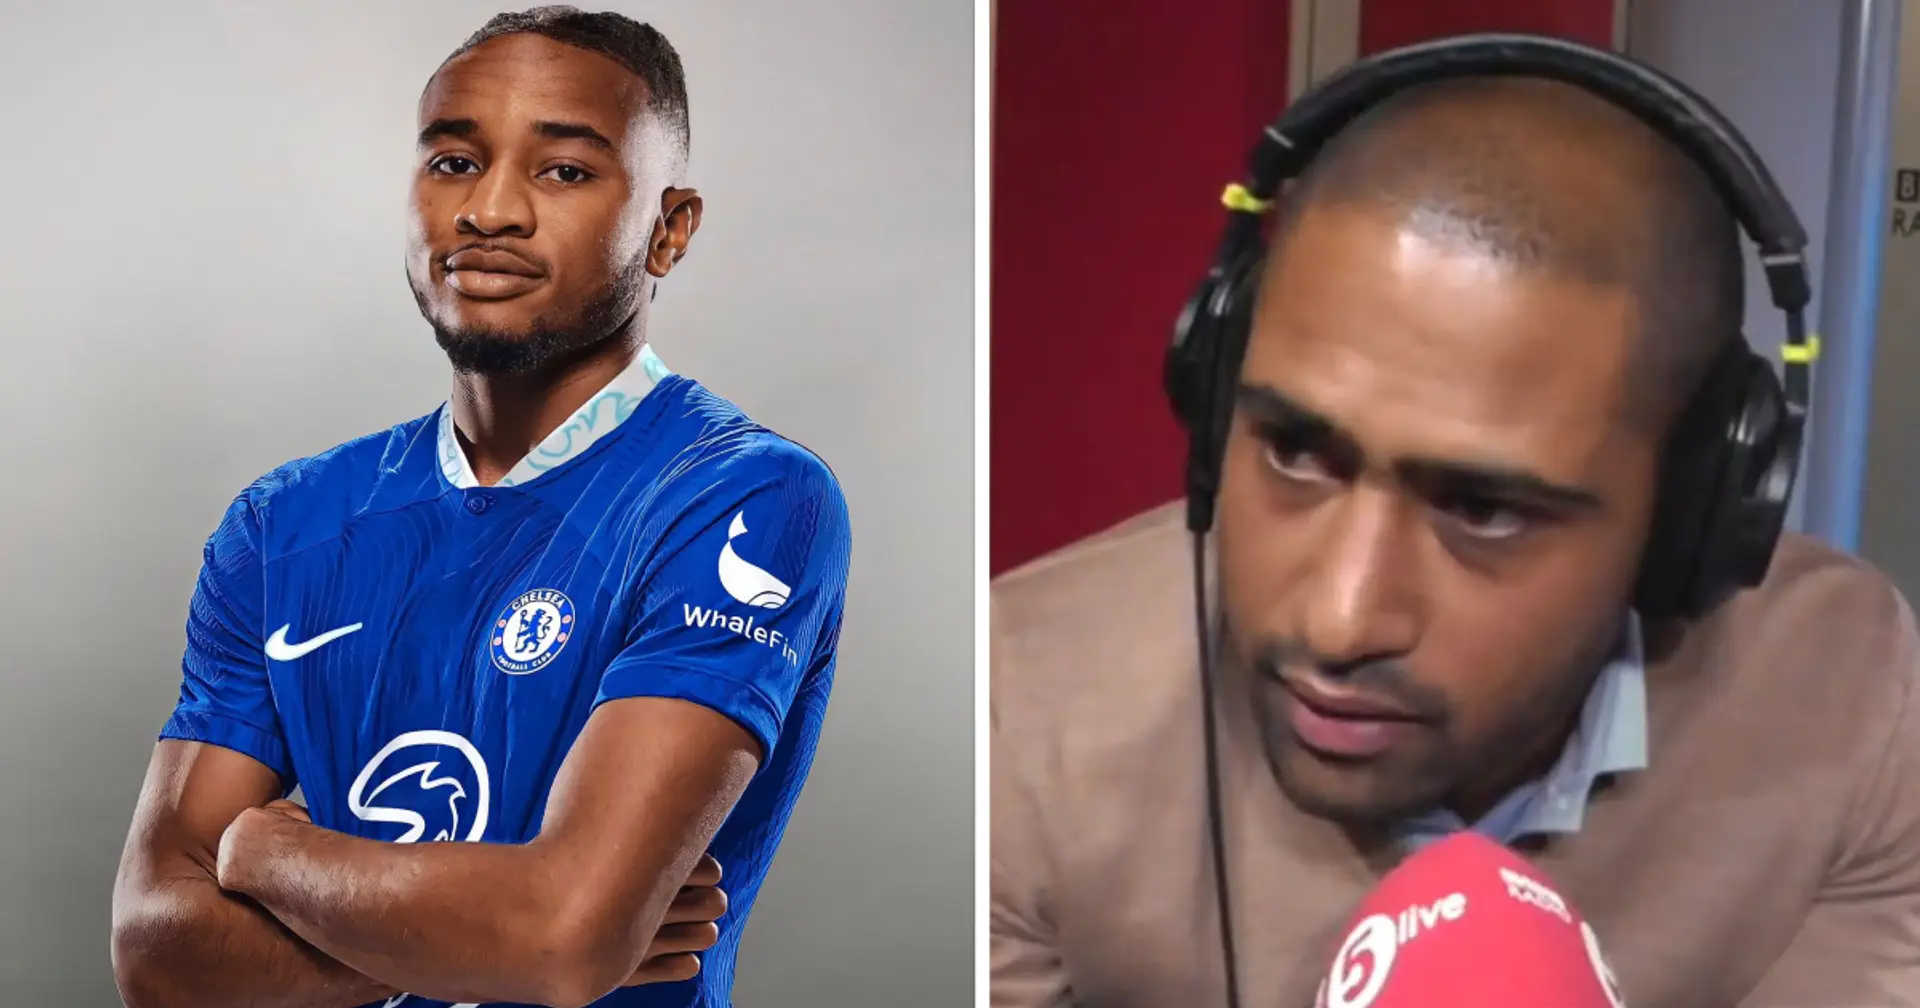 'I don't agree with Rangnick': Glen Johnson weighs in on Nkunku coming to Chelsea too early argument 